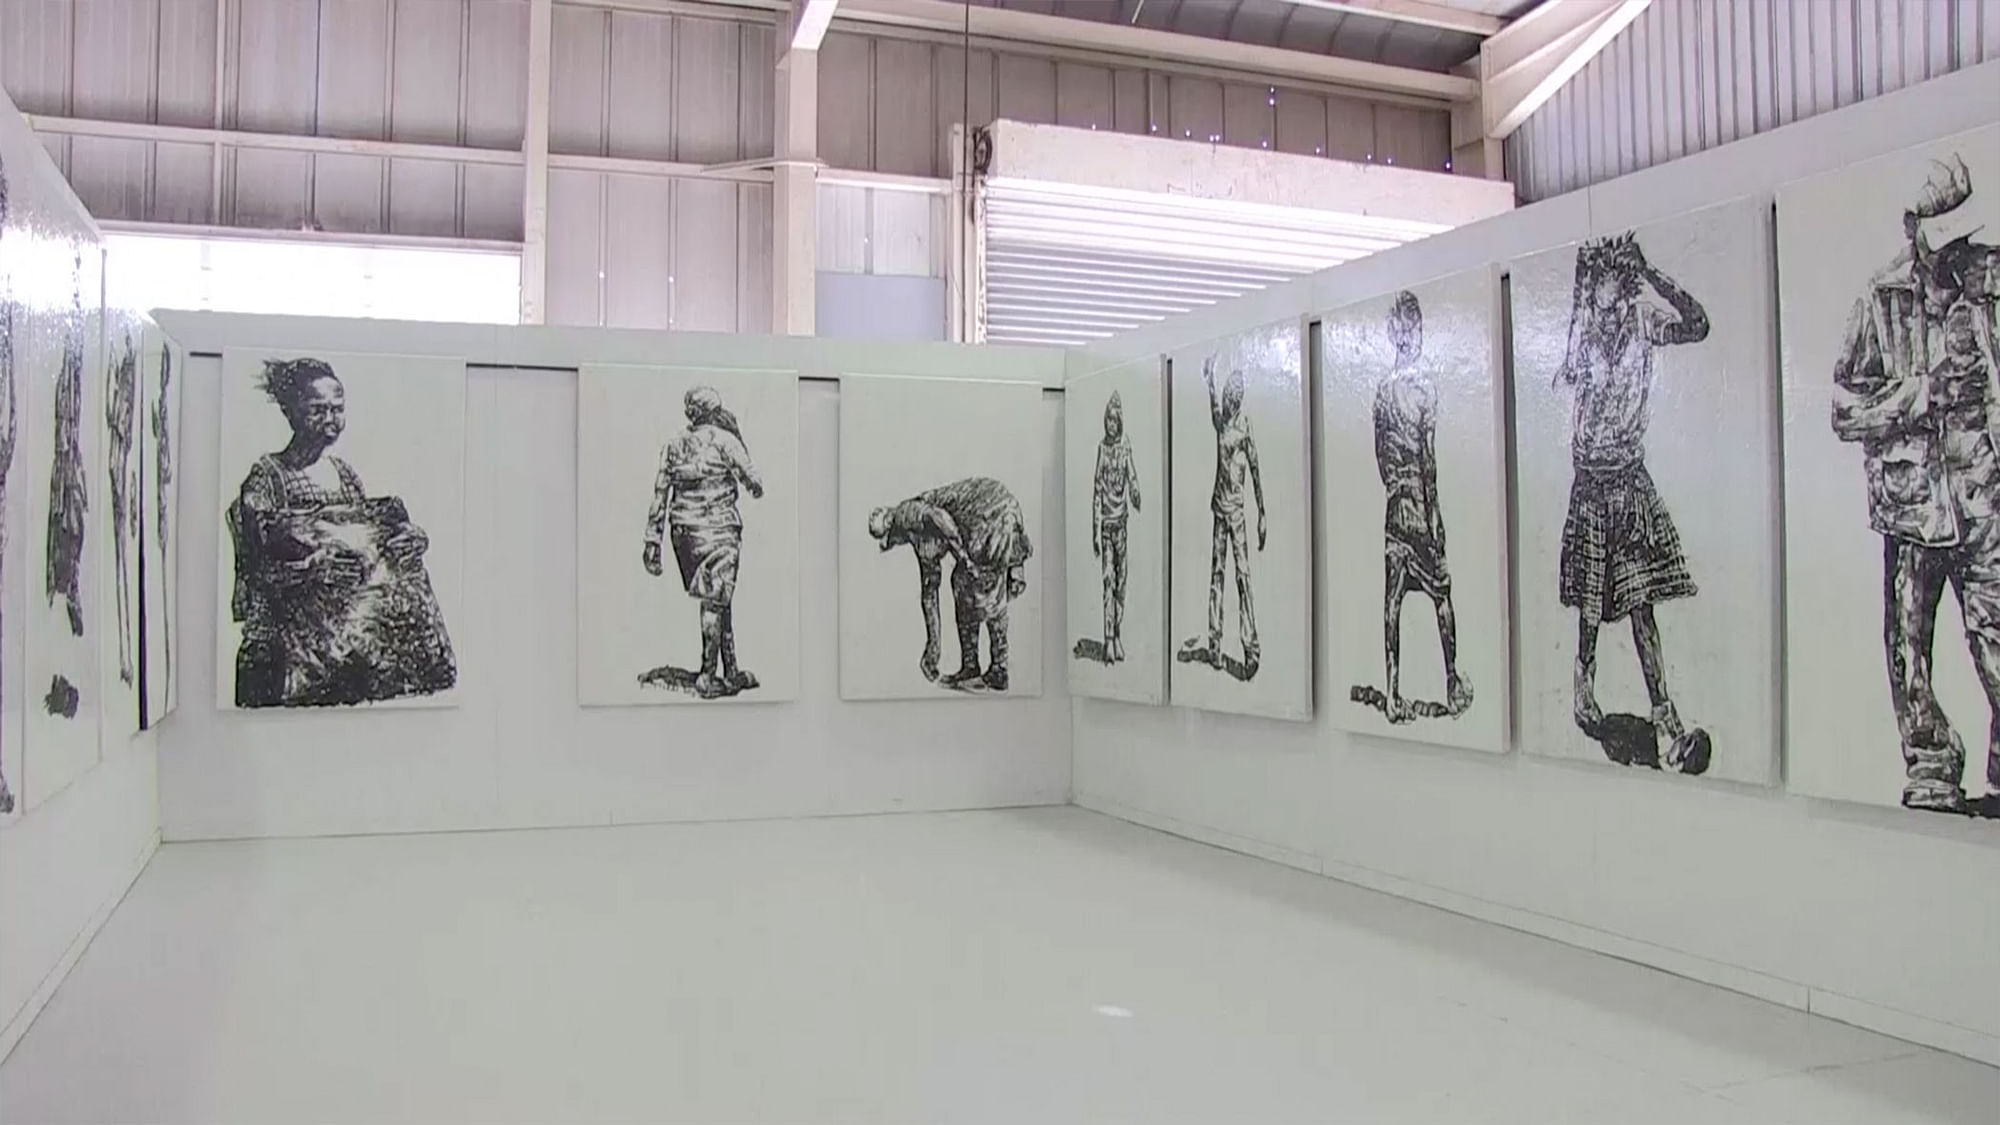 Some of the art installations created by Mbongeni Buthelezi in Johannesburg. (Photo: AP screengrab)